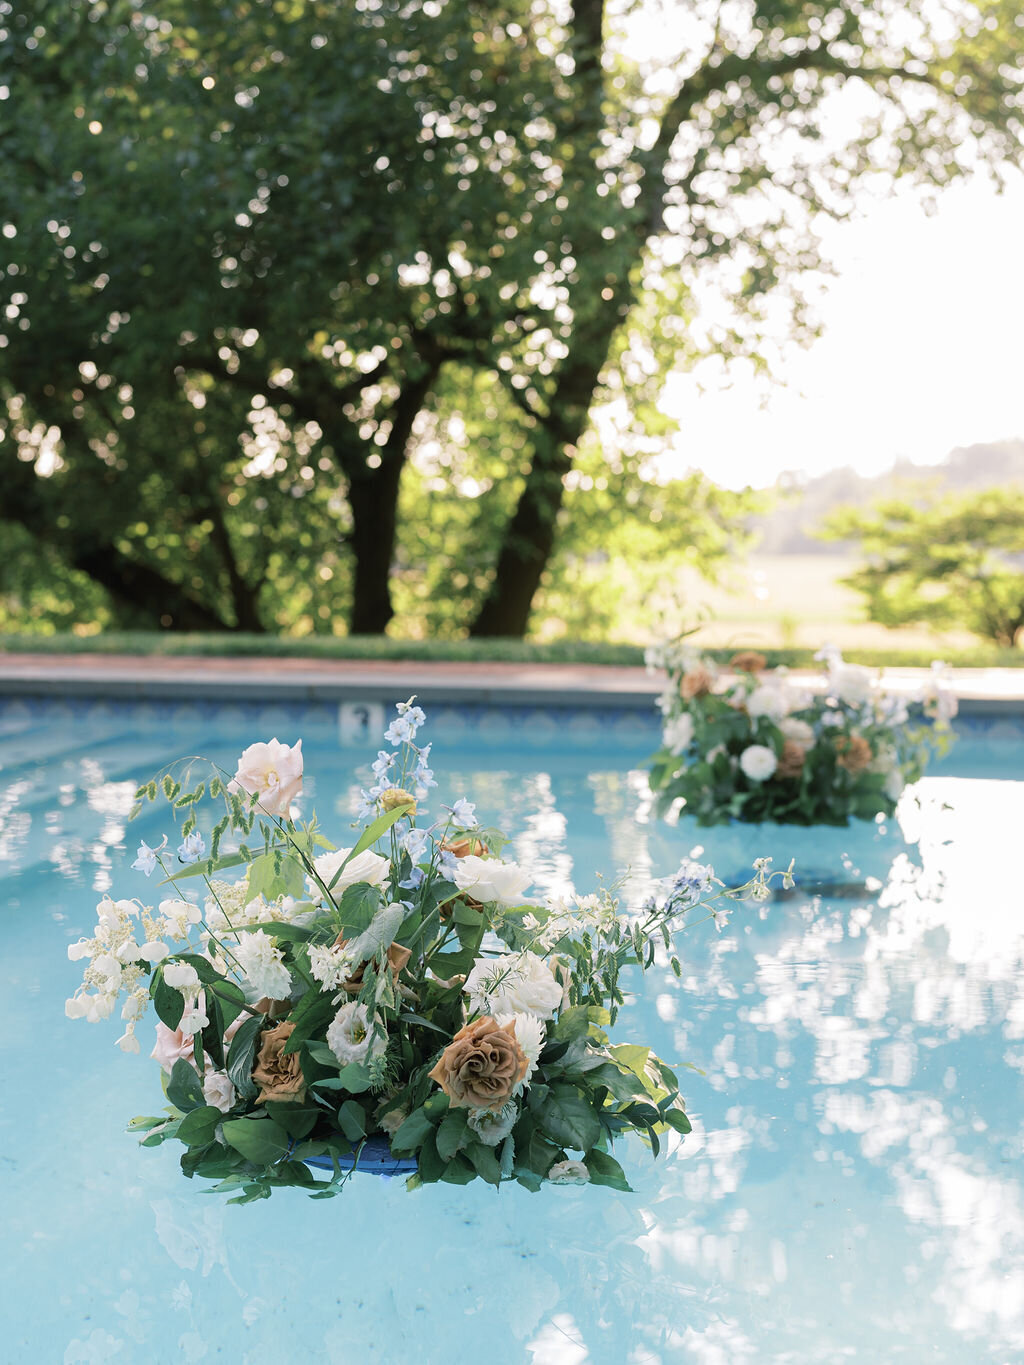 Floating floral arrangements in the pool including wild oat, toffee roses, blush garden roses white lisianthus, blue delphinium, white dahlias and seasonal foliage.